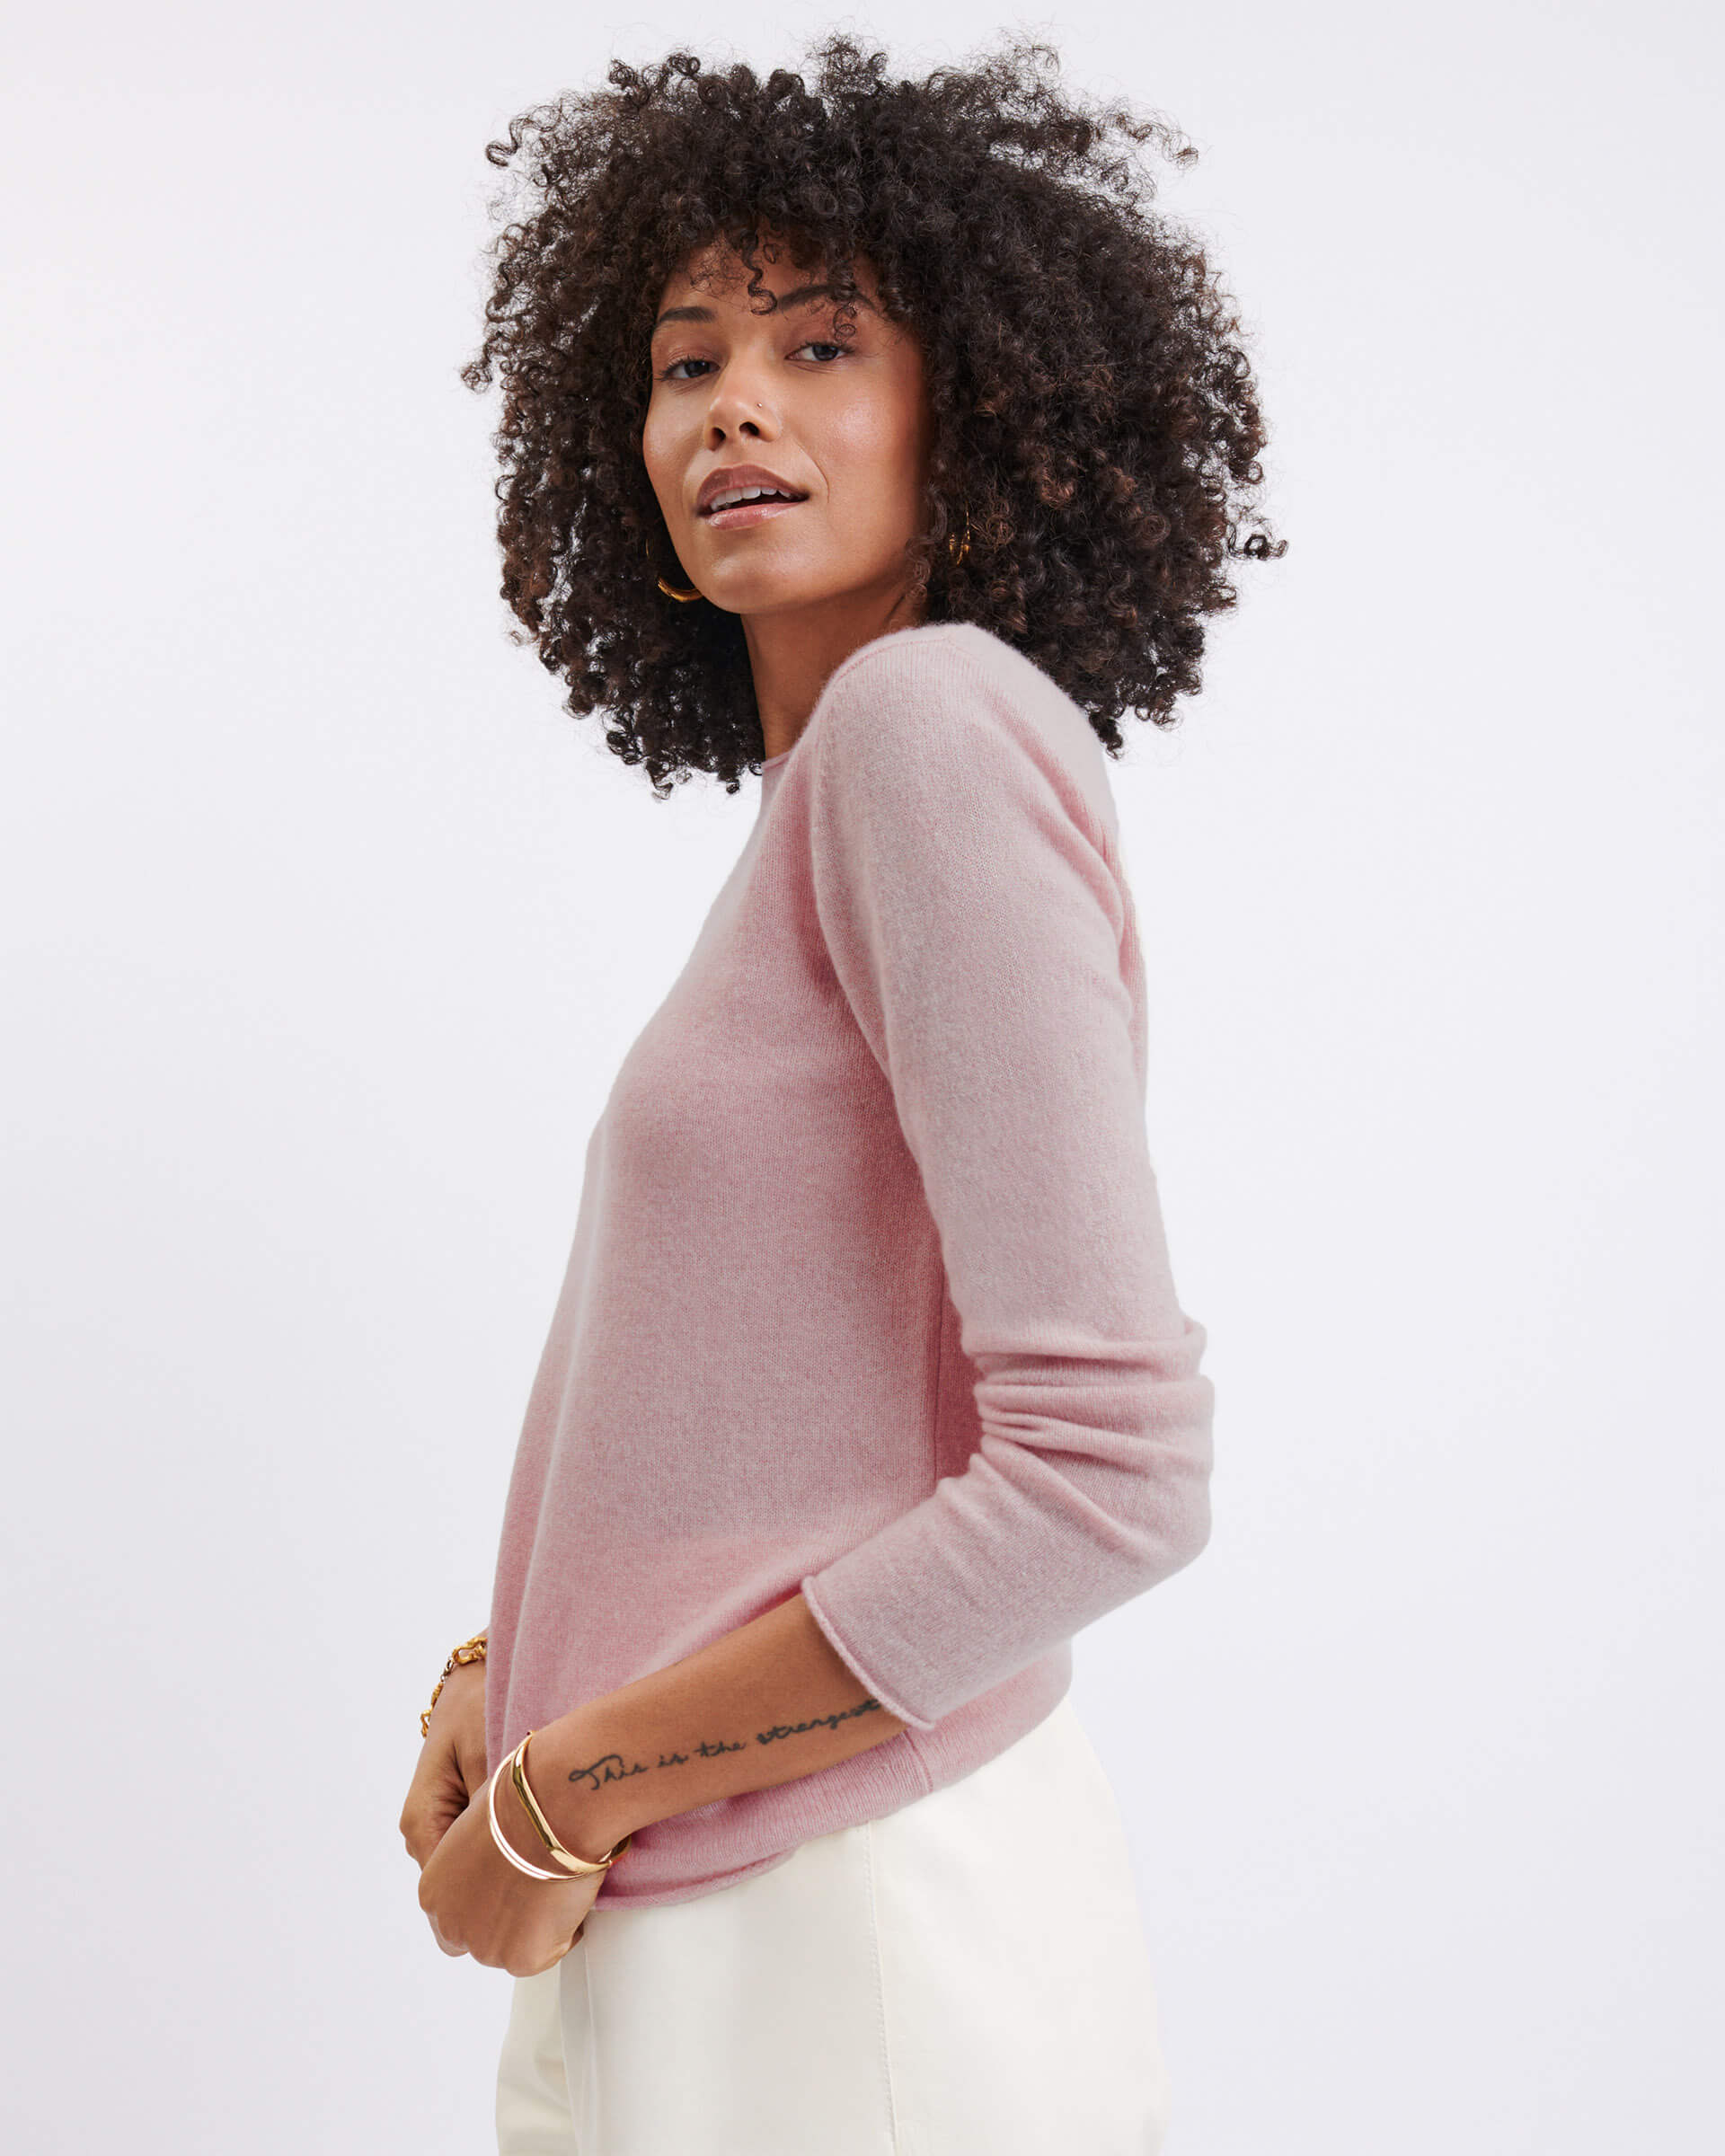 female wearing light pink sweater standing sideways holding bottom of sweater on white background 